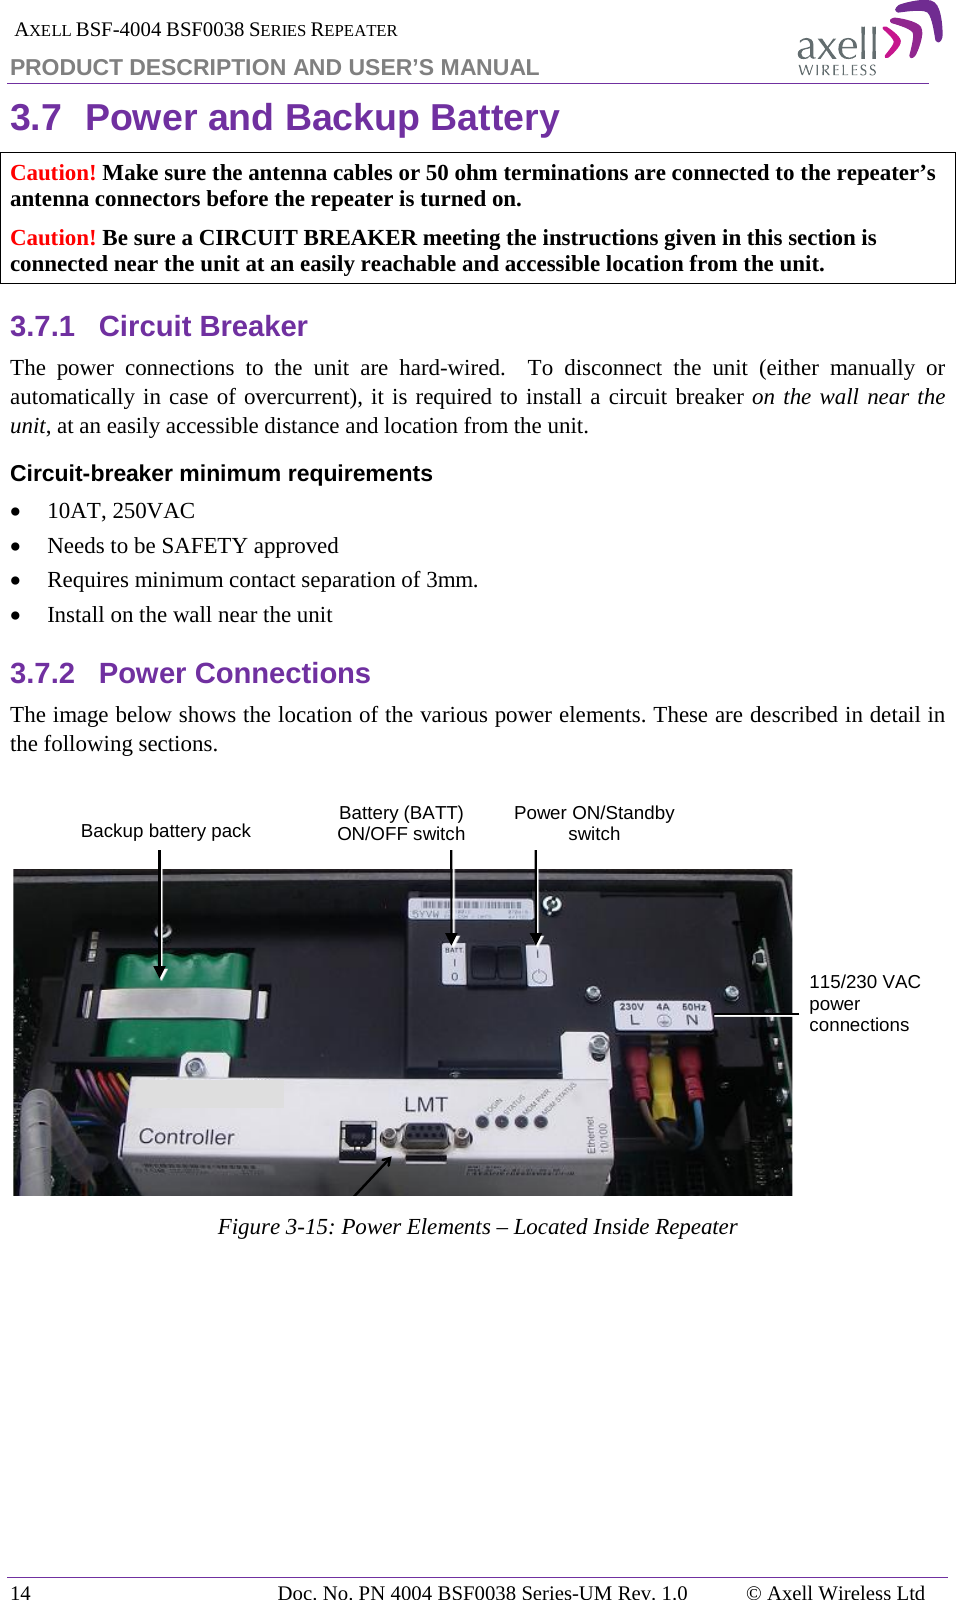  AXELL BSF-4004 BSF0038 SERIES REPEATER PRODUCT DESCRIPTION AND USER’S MANUAL 3.7 Power and Backup Battery Caution! Make sure the antenna cables or 50 ohm terminations are connected to the repeater’s antenna connectors before the repeater is turned on. Caution! Be sure a CIRCUIT BREAKER meeting the instructions given in this section is connected near the unit at an easily reachable and accessible location from the unit. 3.7.1 Circuit Breaker The power connections to the unit are hard-wired.  To disconnect the unit (either manually or automatically in case of overcurrent), it is required to install a circuit breaker on the wall near the unit, at an easily accessible distance and location from the unit. Circuit-breaker minimum requirements • 10AT, 250VAC • Needs to be SAFETY approved • Requires minimum contact separation of 3mm. • Install on the wall near the unit  3.7.2 Power Connections The image below shows the location of the various power elements. These are described in detail in the following sections.    Figure  3-15: Power Elements – Located Inside Repeater    115/230 VAC power connections Backup battery pack Battery (BATT) ON/OFF switch  Power ON/Standby switch  14 Doc. No. PN 4004 BSF0038 Series-UM Rev. 1.0  © Axell Wireless Ltd 